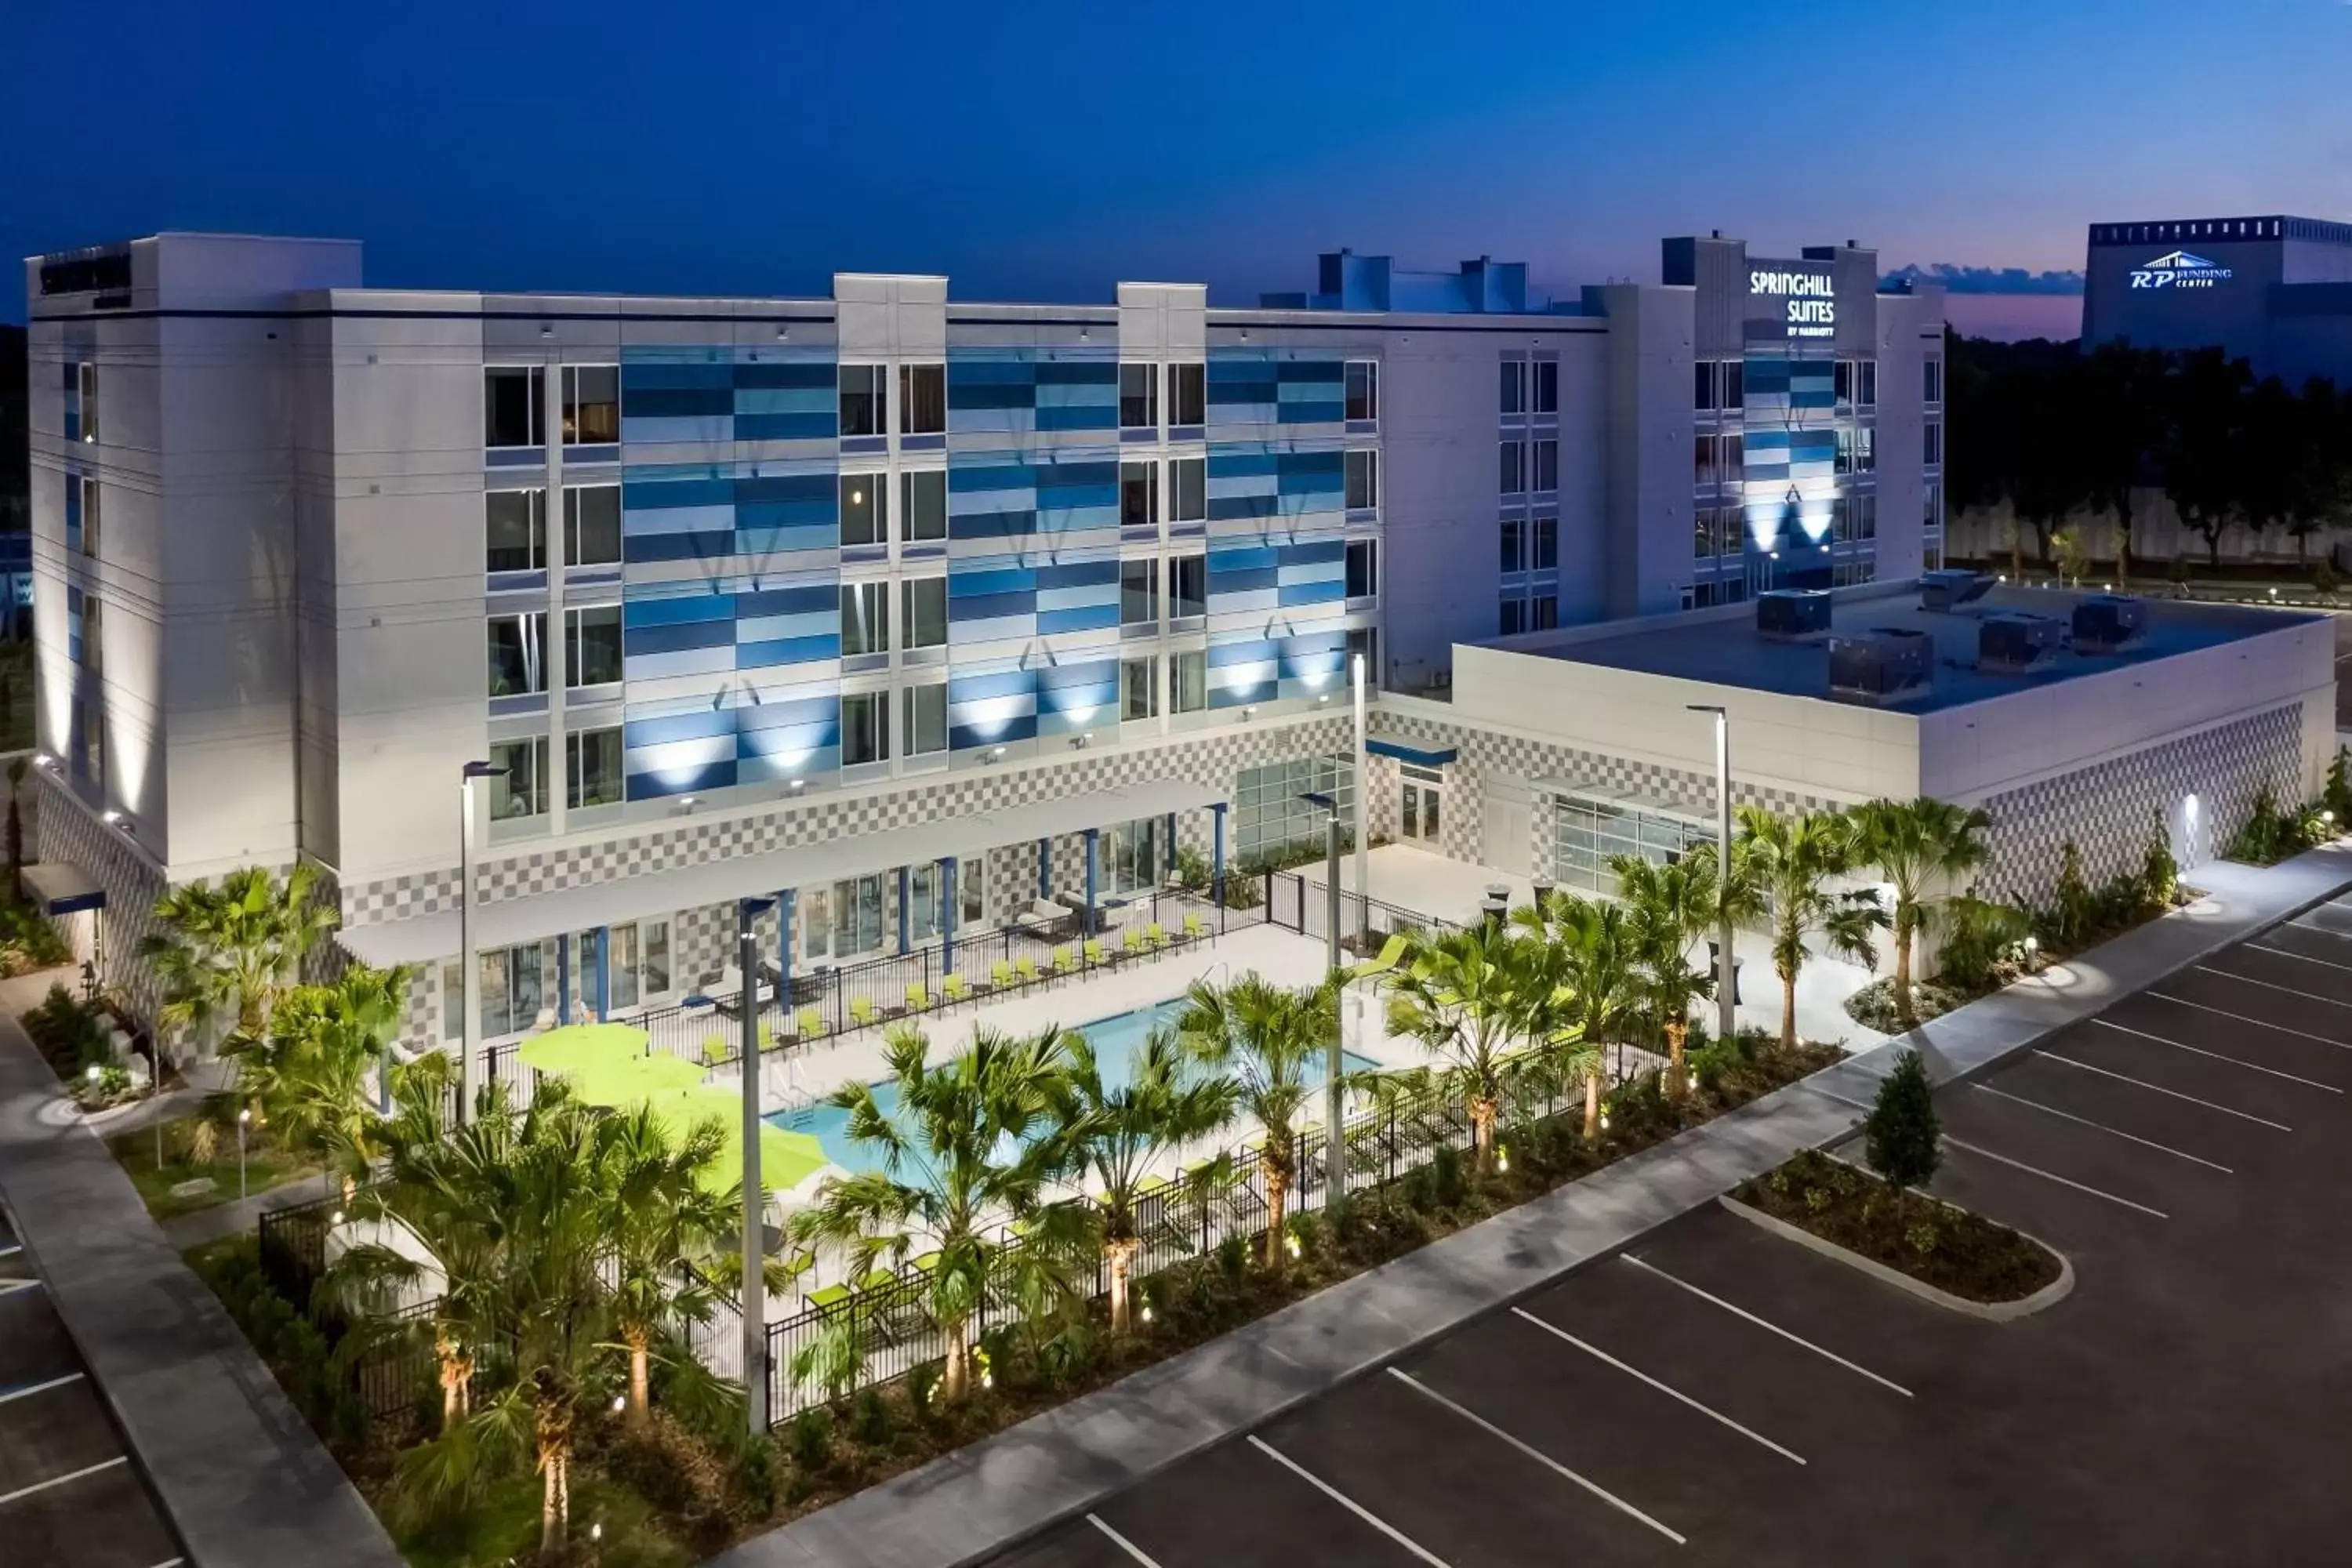 Property building, Pool View in SpringHill Suites Lakeland